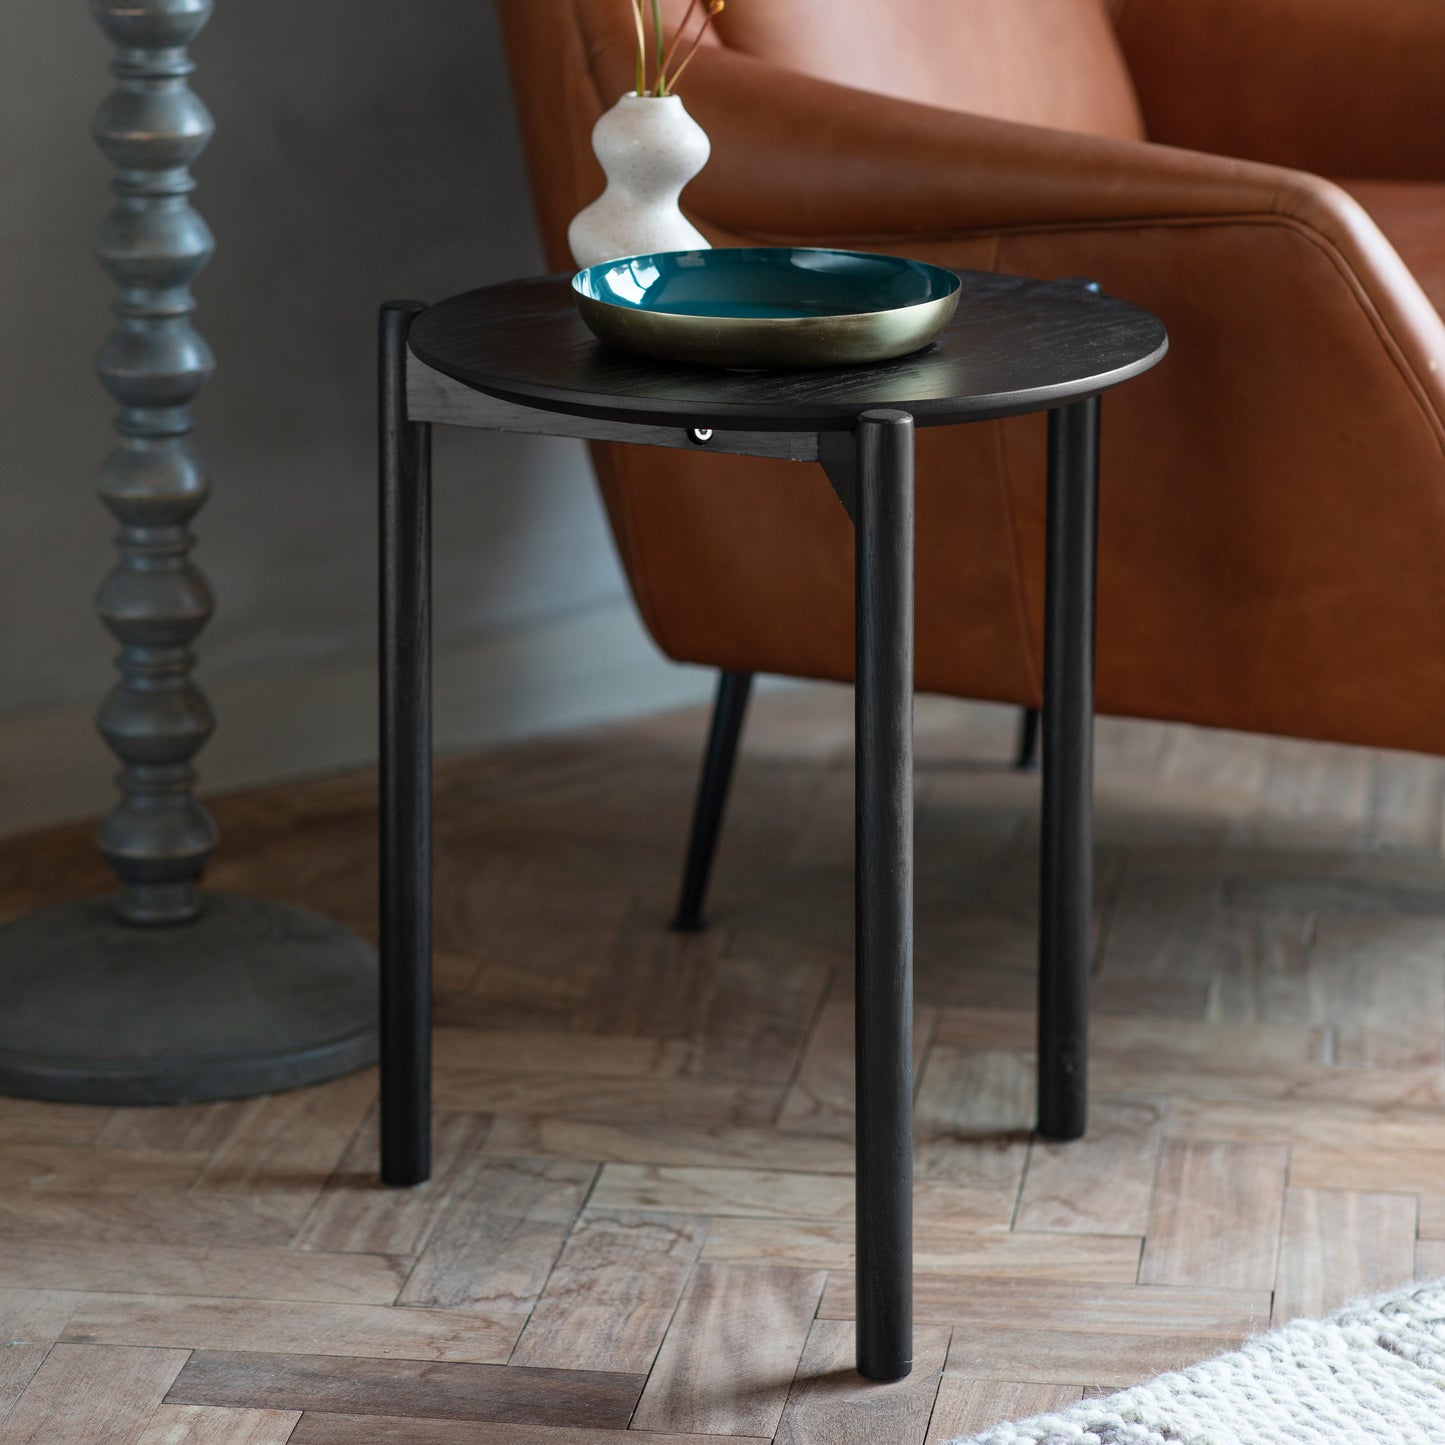 An Allington Side Table, a stylish piece of home furniture with a sleek black finish, perfect for interior decor.